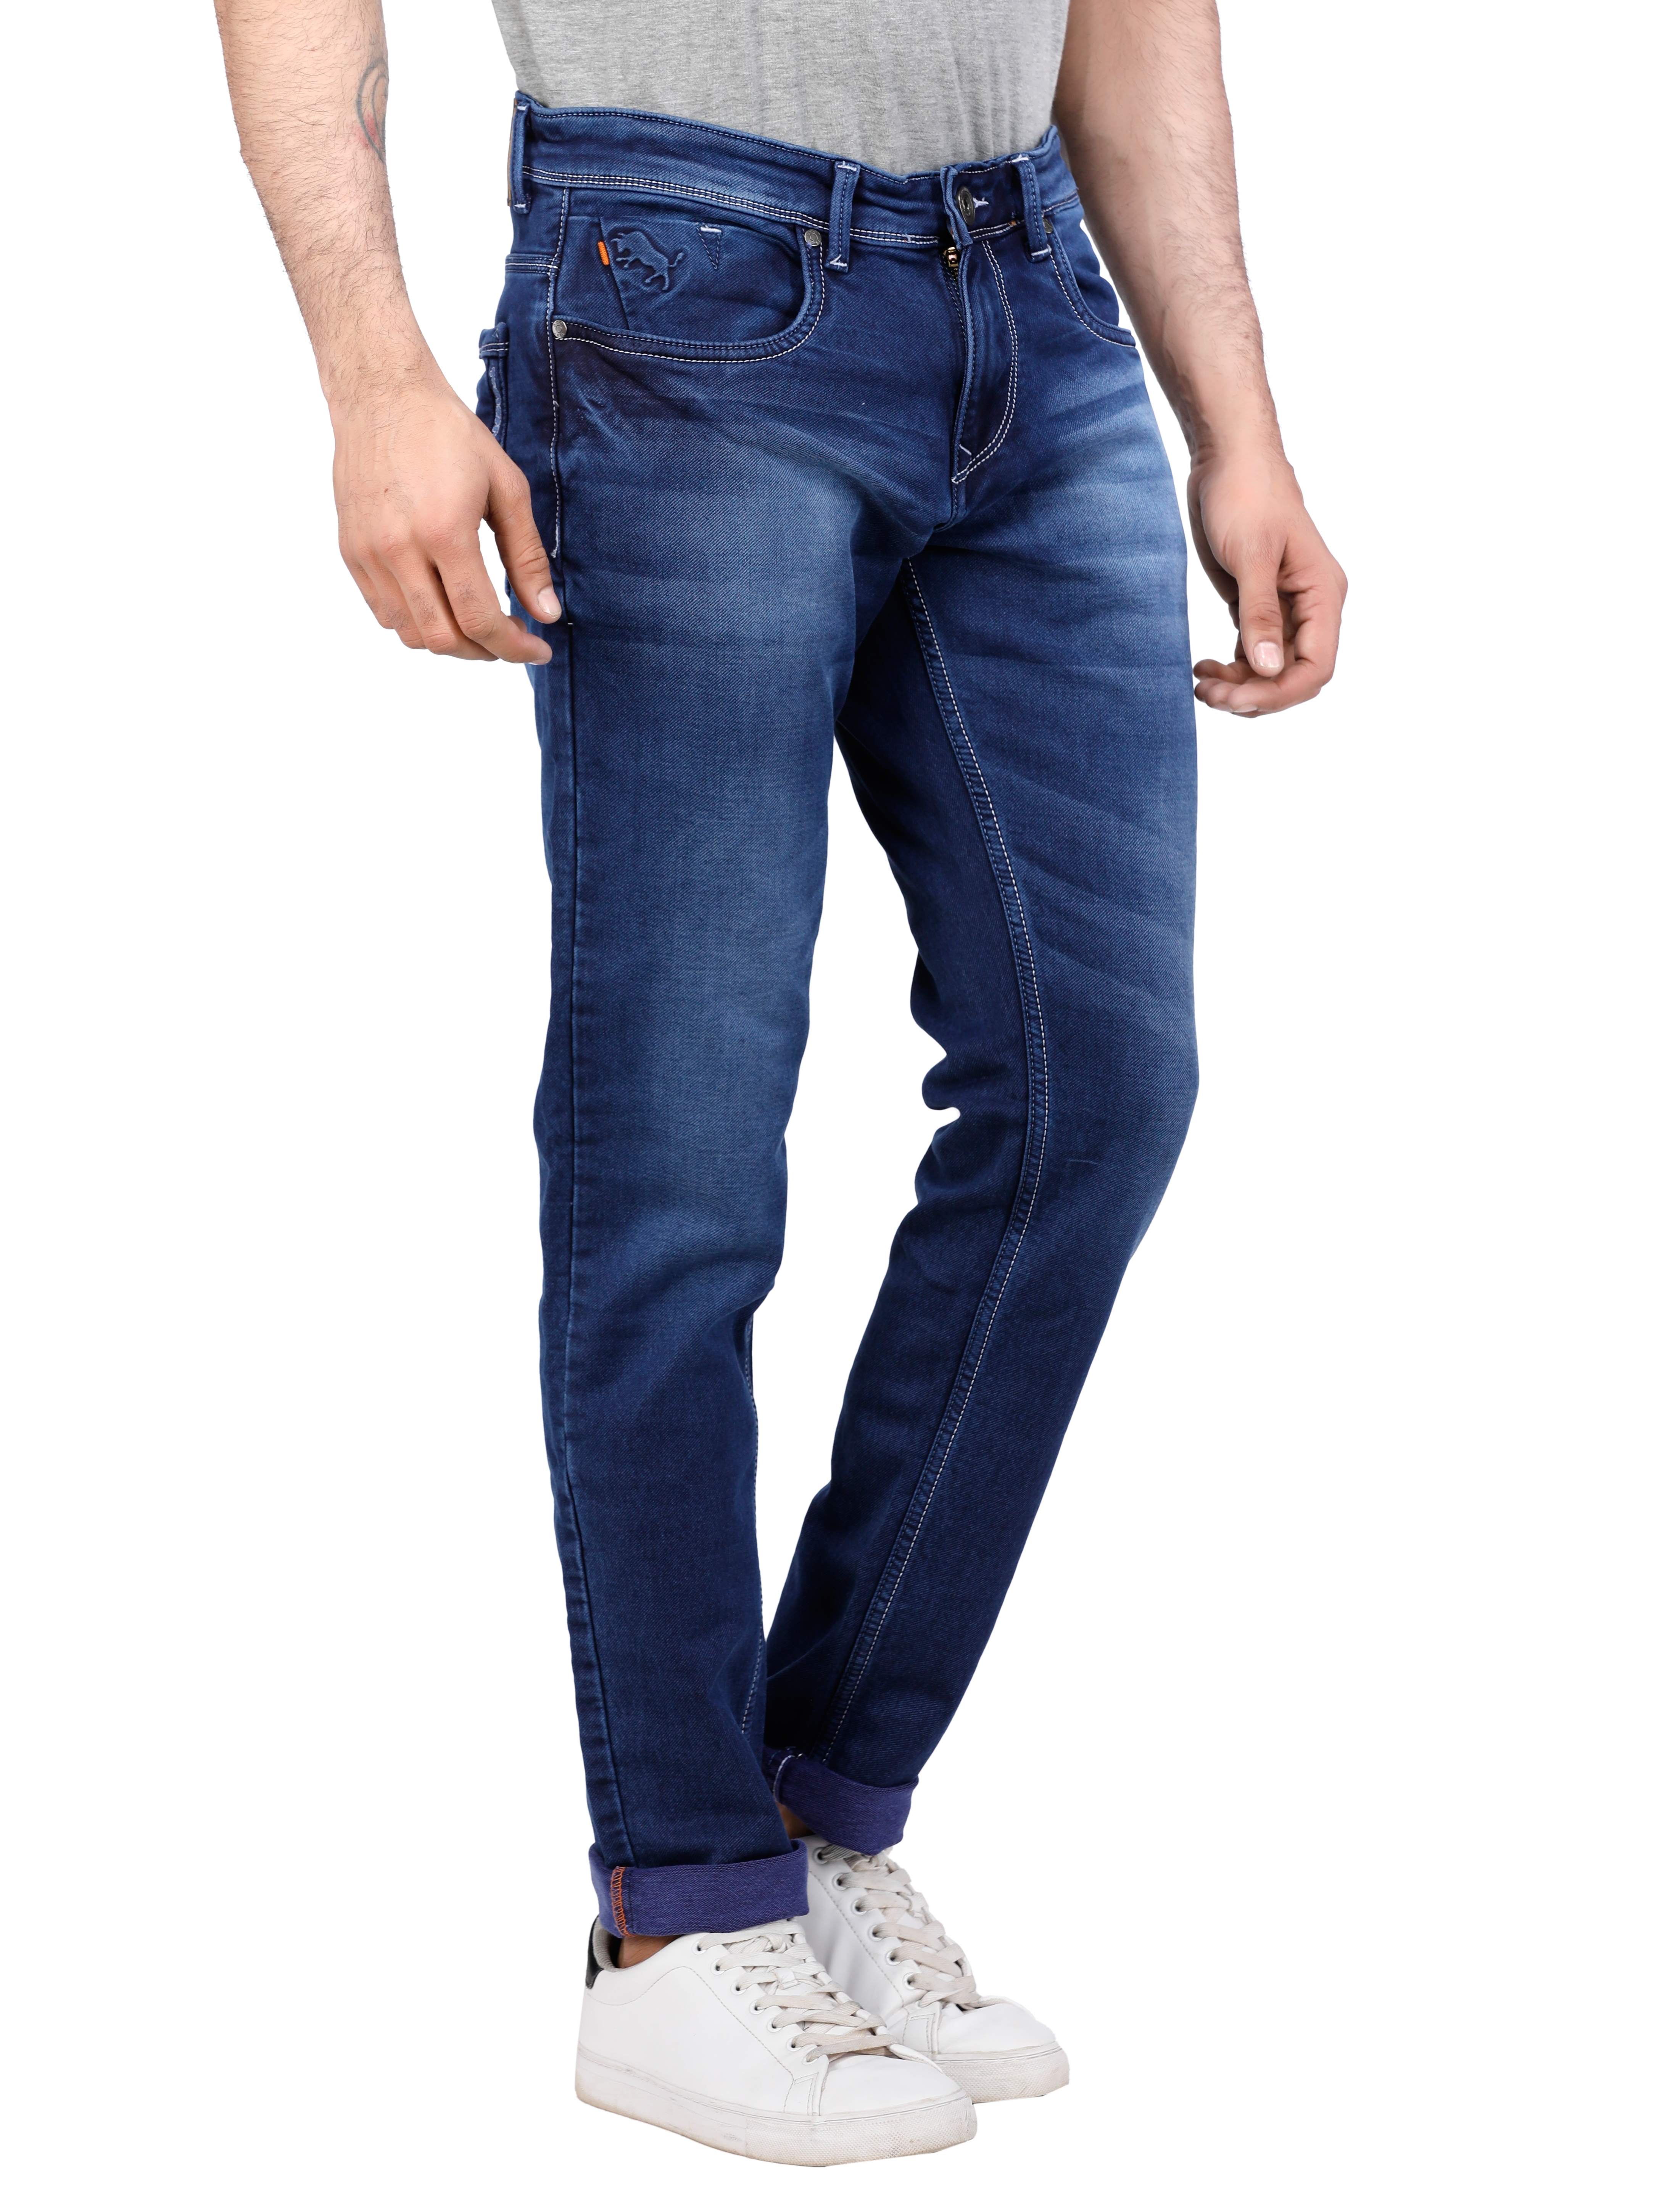 D'cot by Donear | D'cot by Donear Men Blue Cotton Slim Knitted Jeans 3